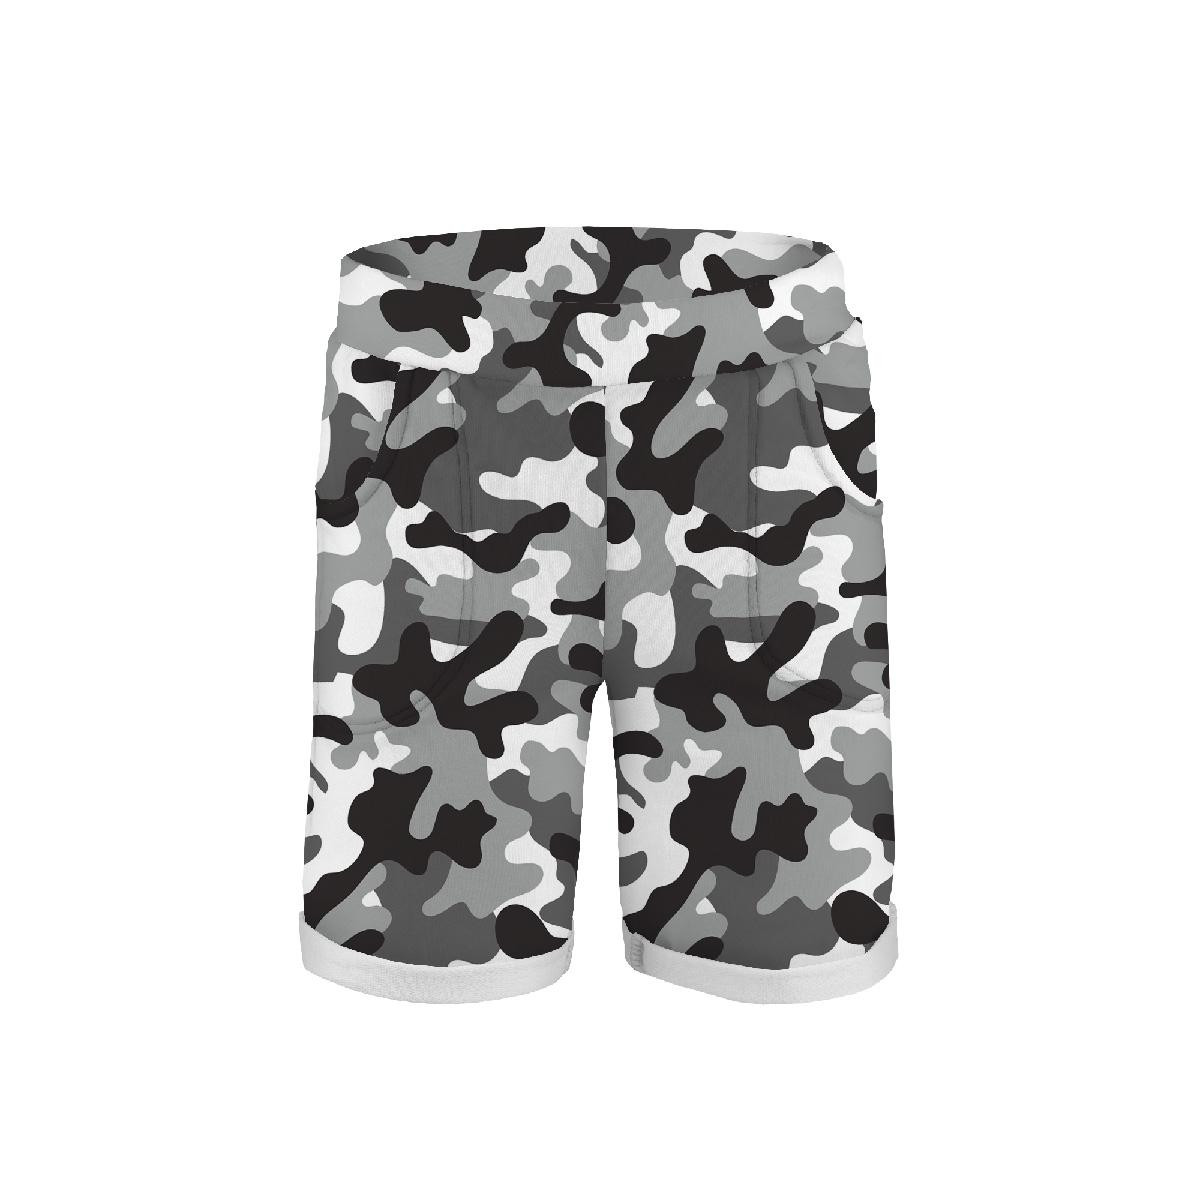 KID`S SHORTS (RIO) - CAMOUFLAGE GREY - looped knit fabric 